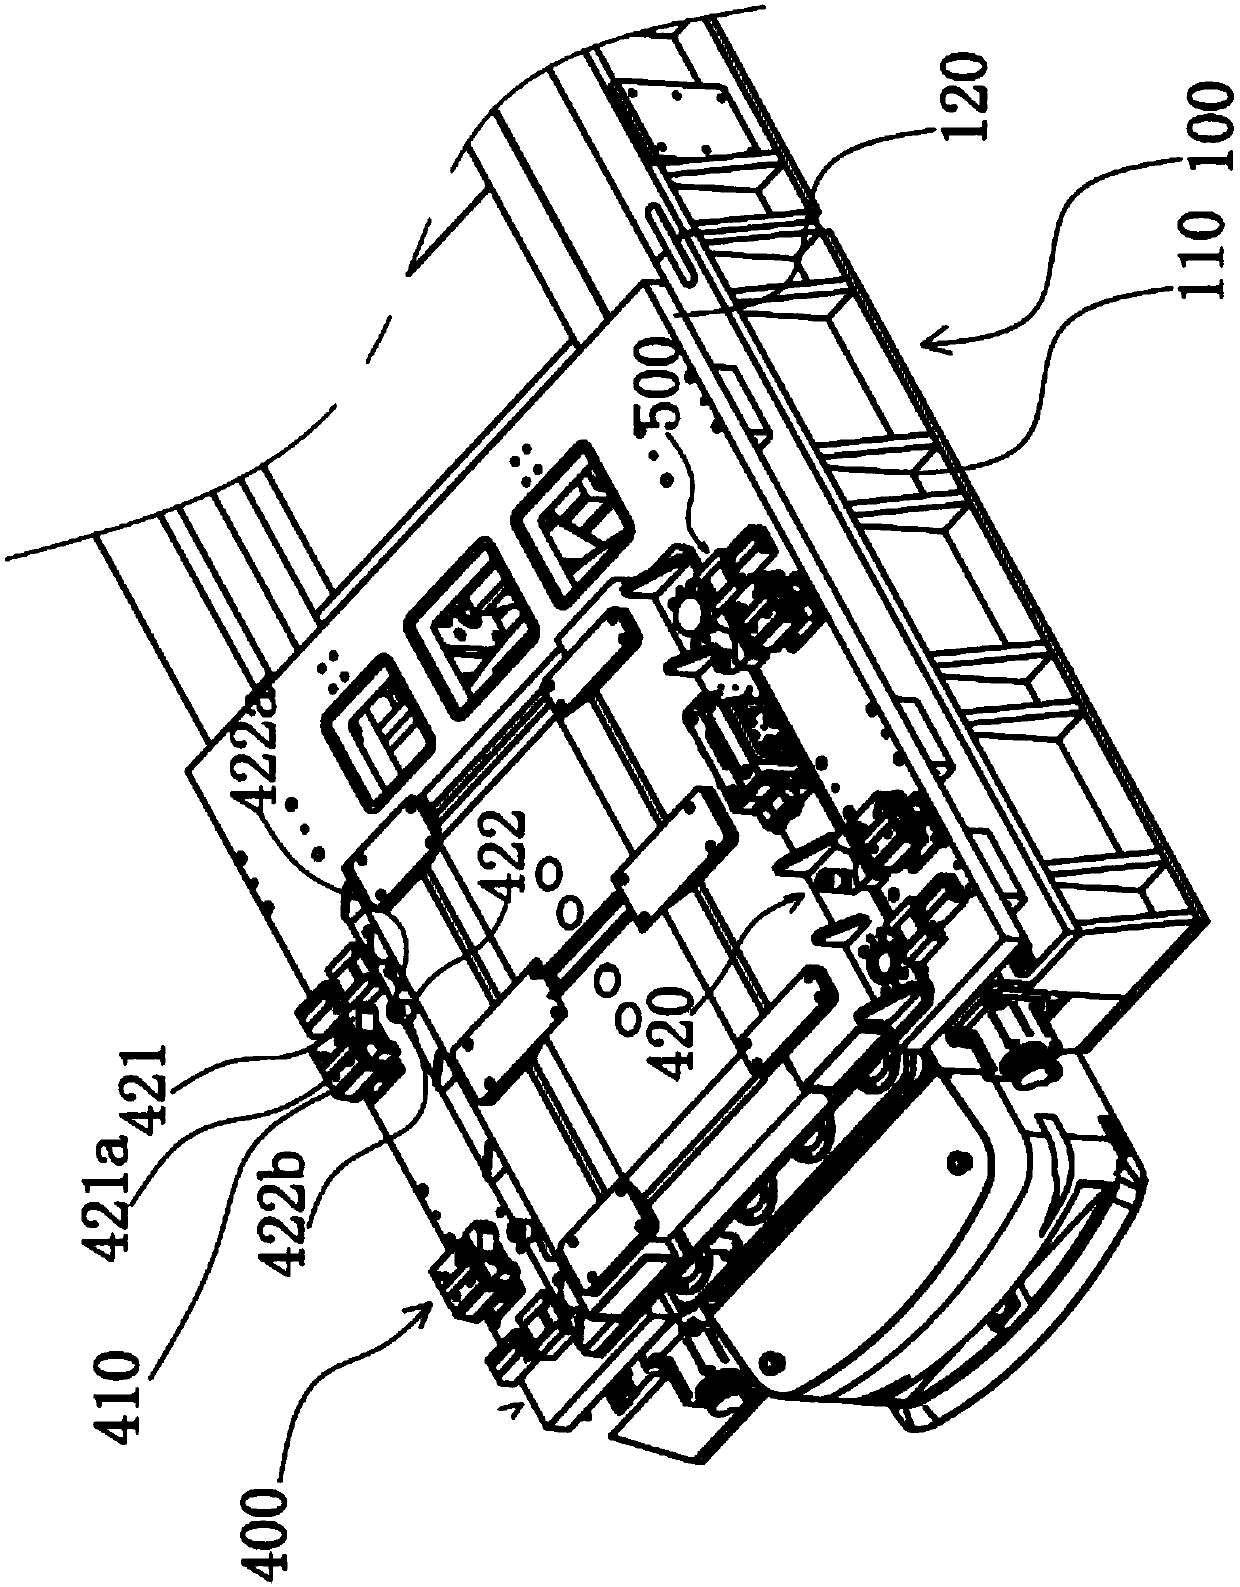 Automatic positioning and pressing device for automobile parts